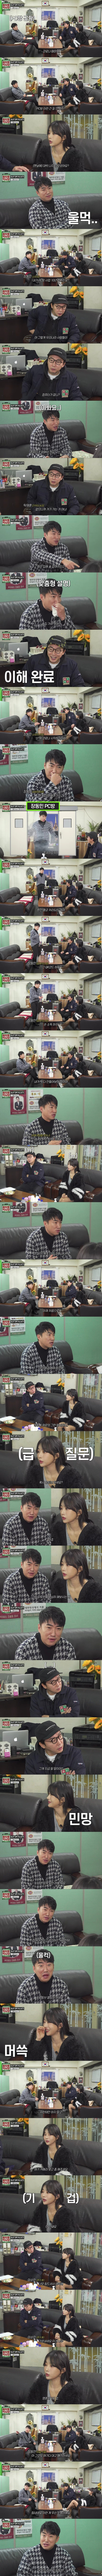 Jang Dong-min is thinking about quitting his PC room business.jpg